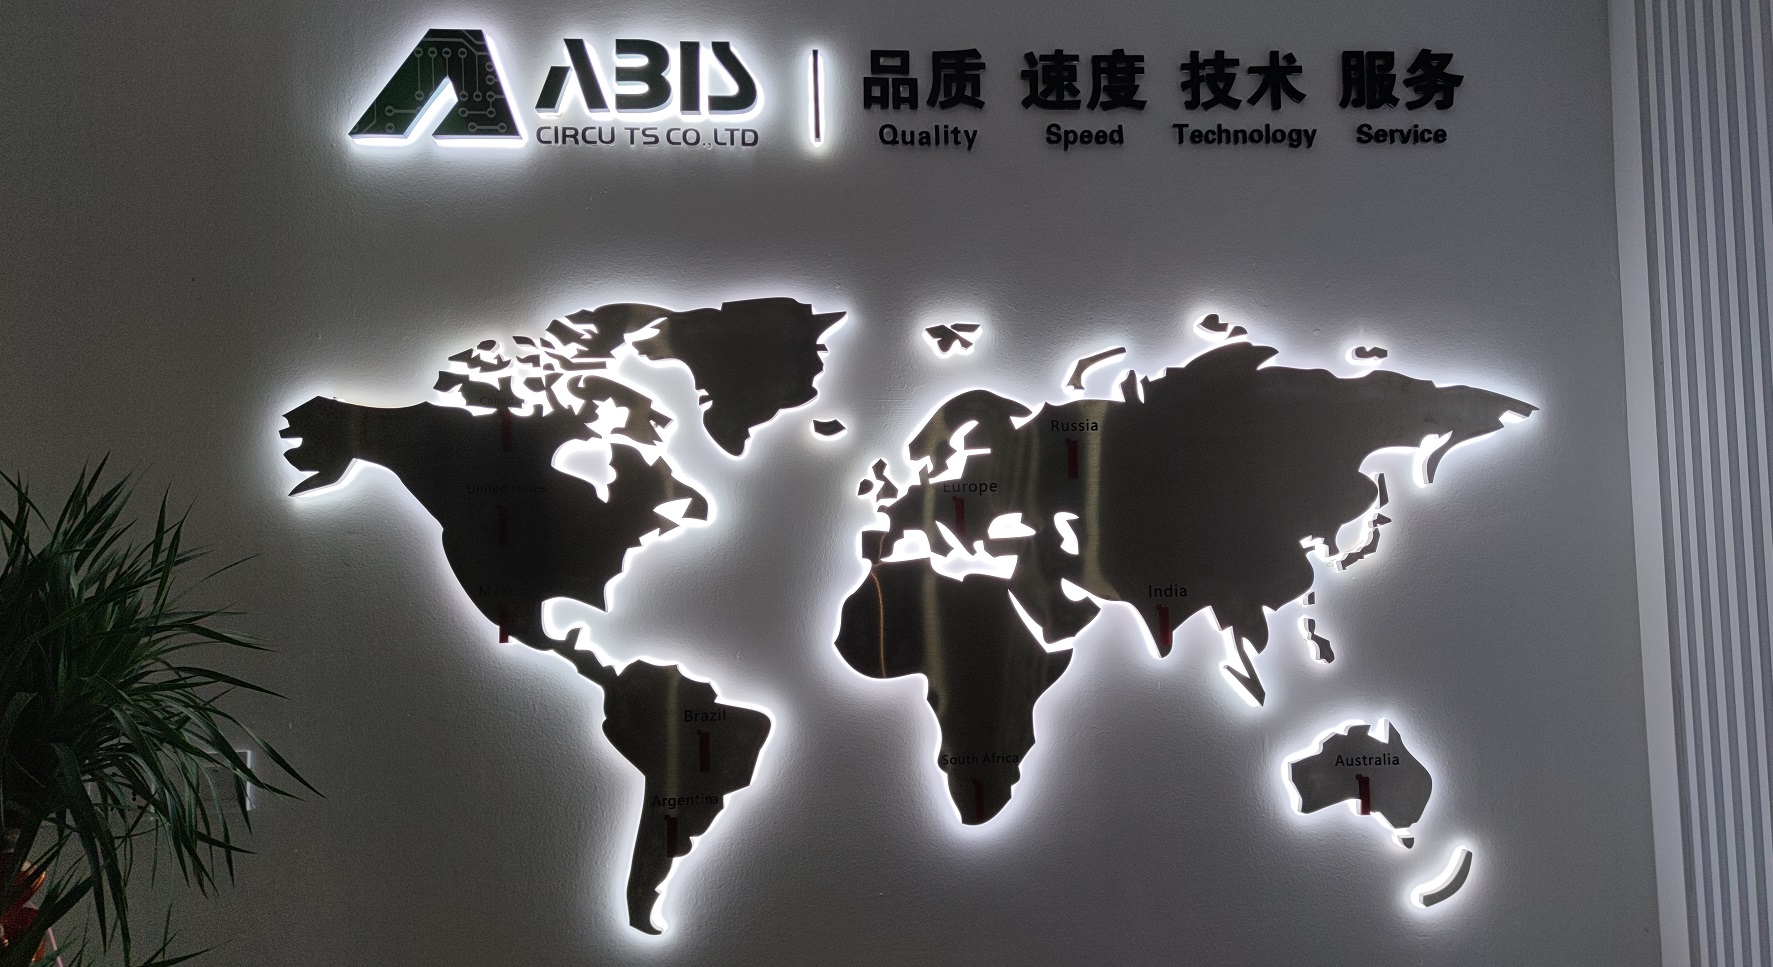 Enhancing Creativity at ABIS Electronics: A Green Office Initiative in Shenzhen